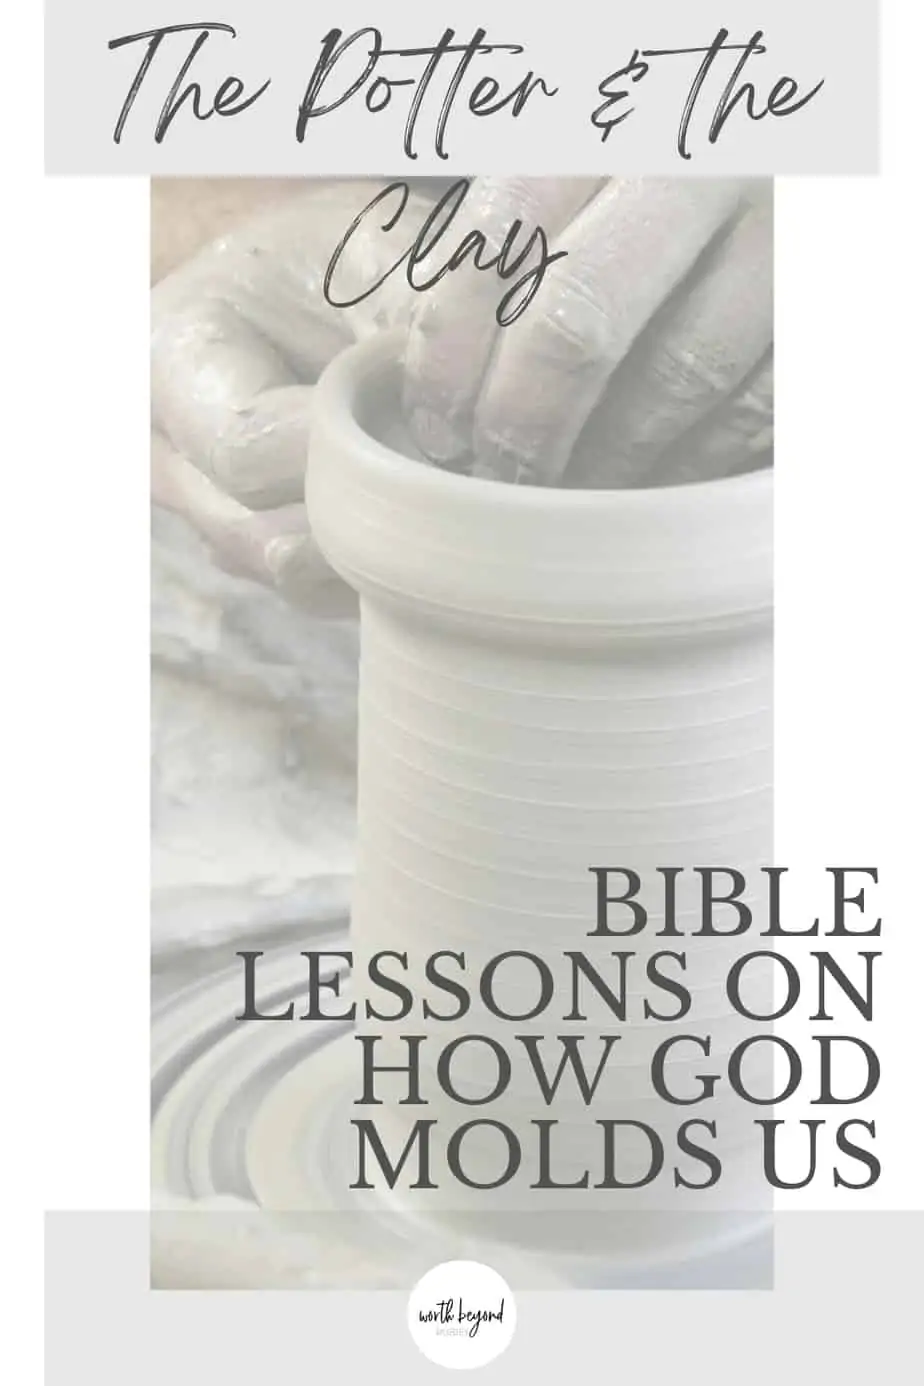 an image of a potter and the clay on a wheel with text that says The Potter & the Clay - Bible Lessons on How God Molds Us